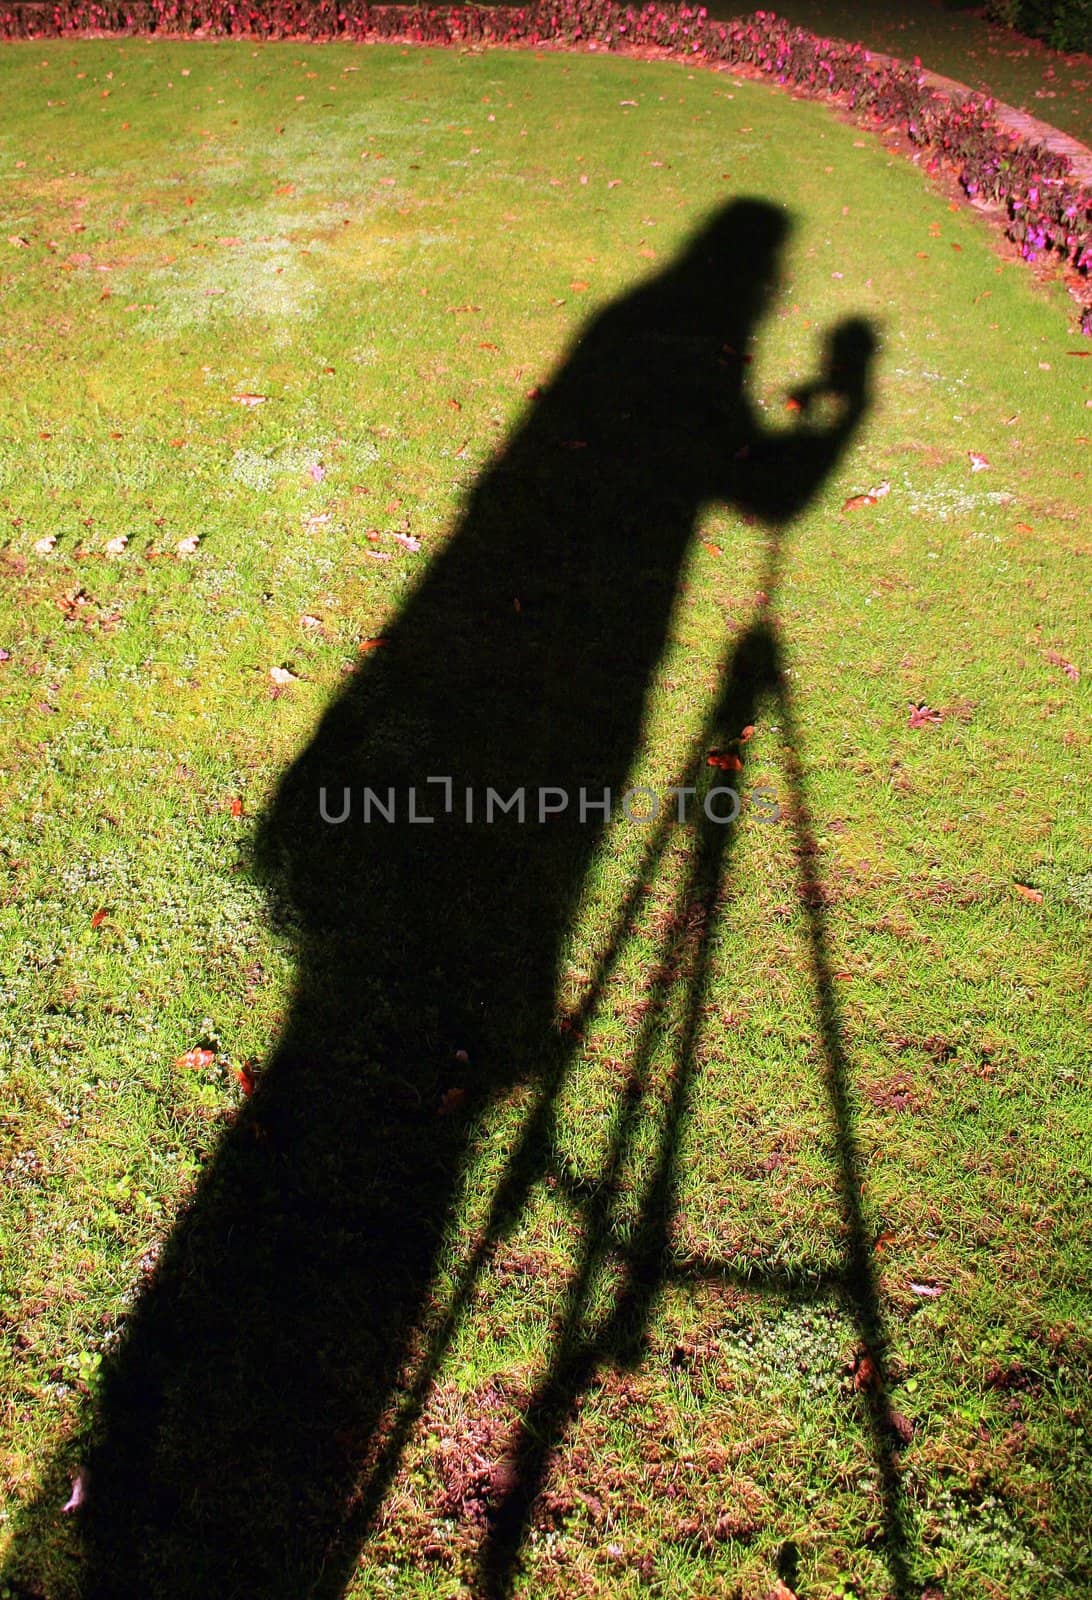 Shadow on the photographer in the grass with camera and tripod.